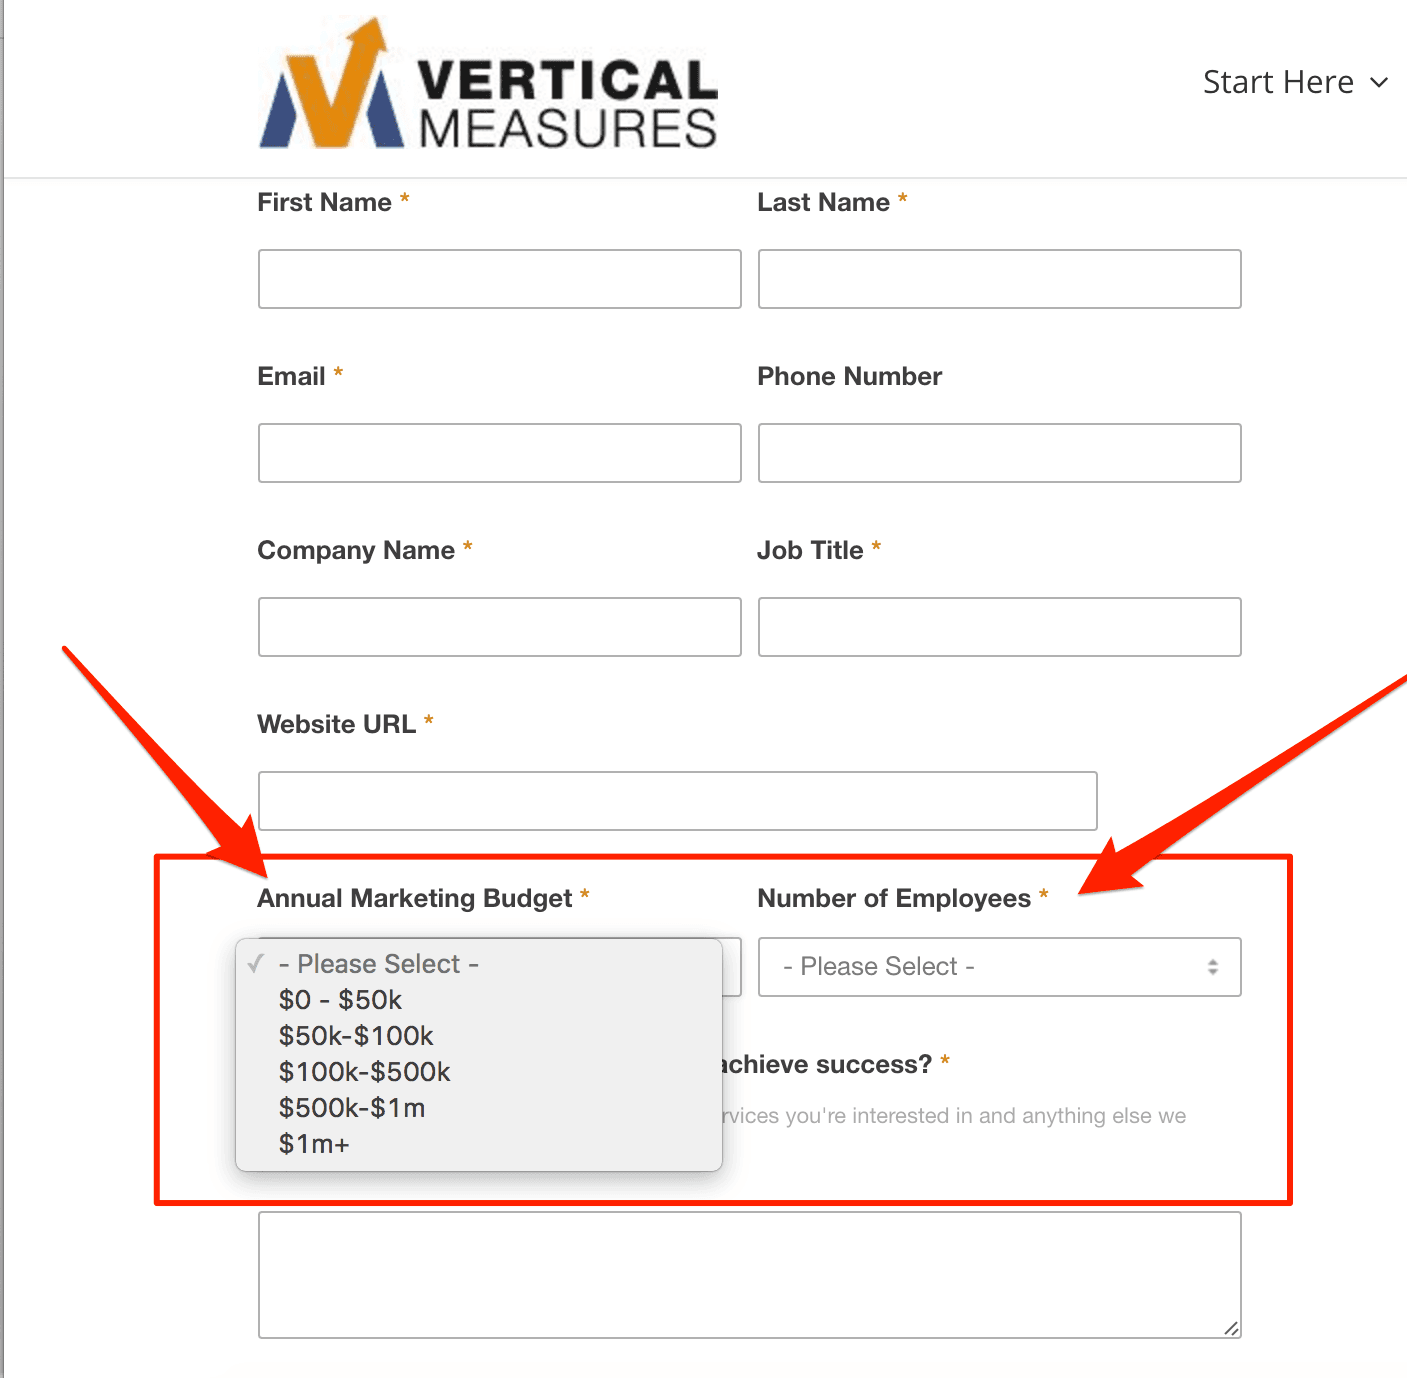 Example of a fill-out form on a website asking about the annual marketing budget & number of employees